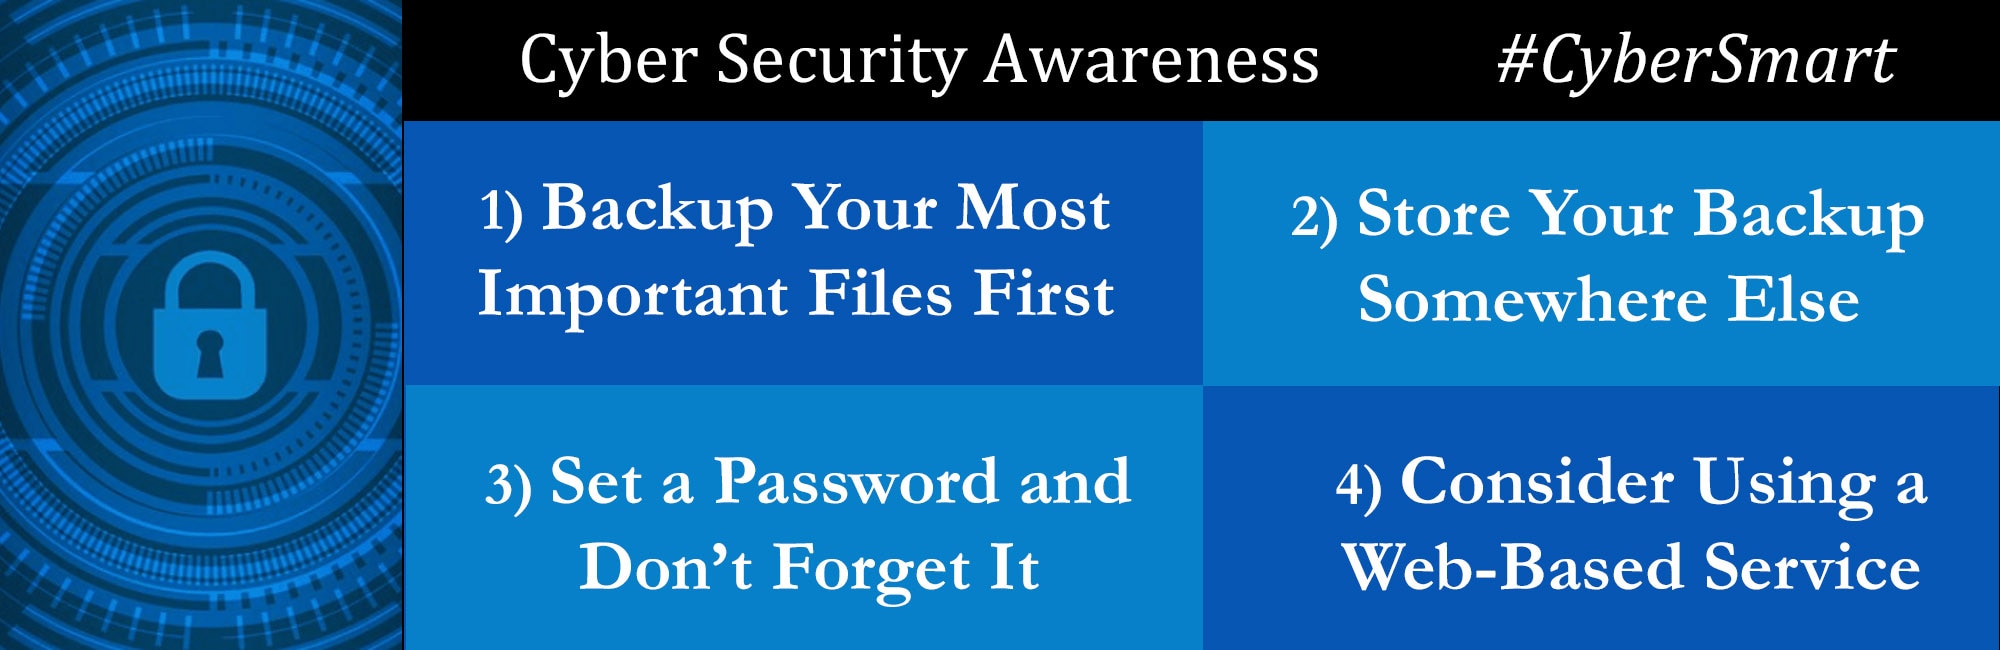 Graphic showing cyber security tips